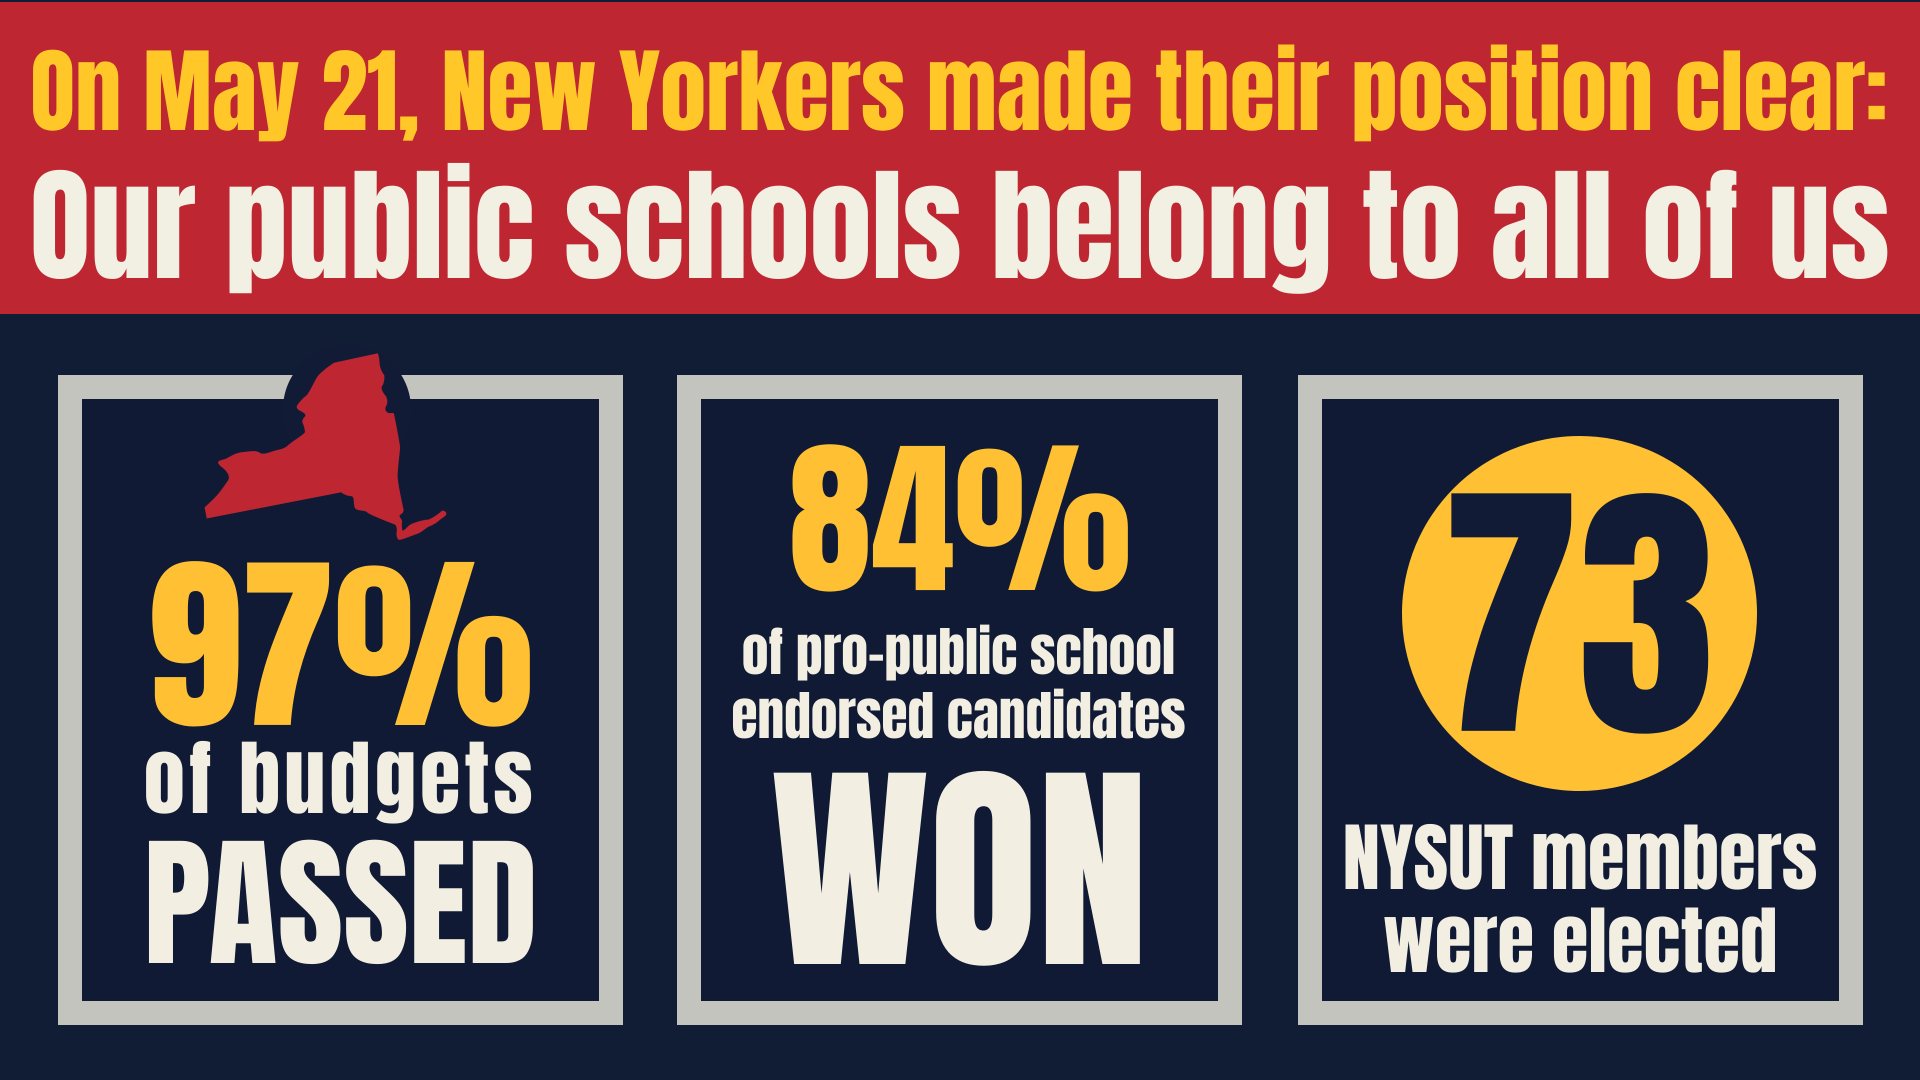 On May 21, New Yorkers made their position clear: Our public schools belong to all of us